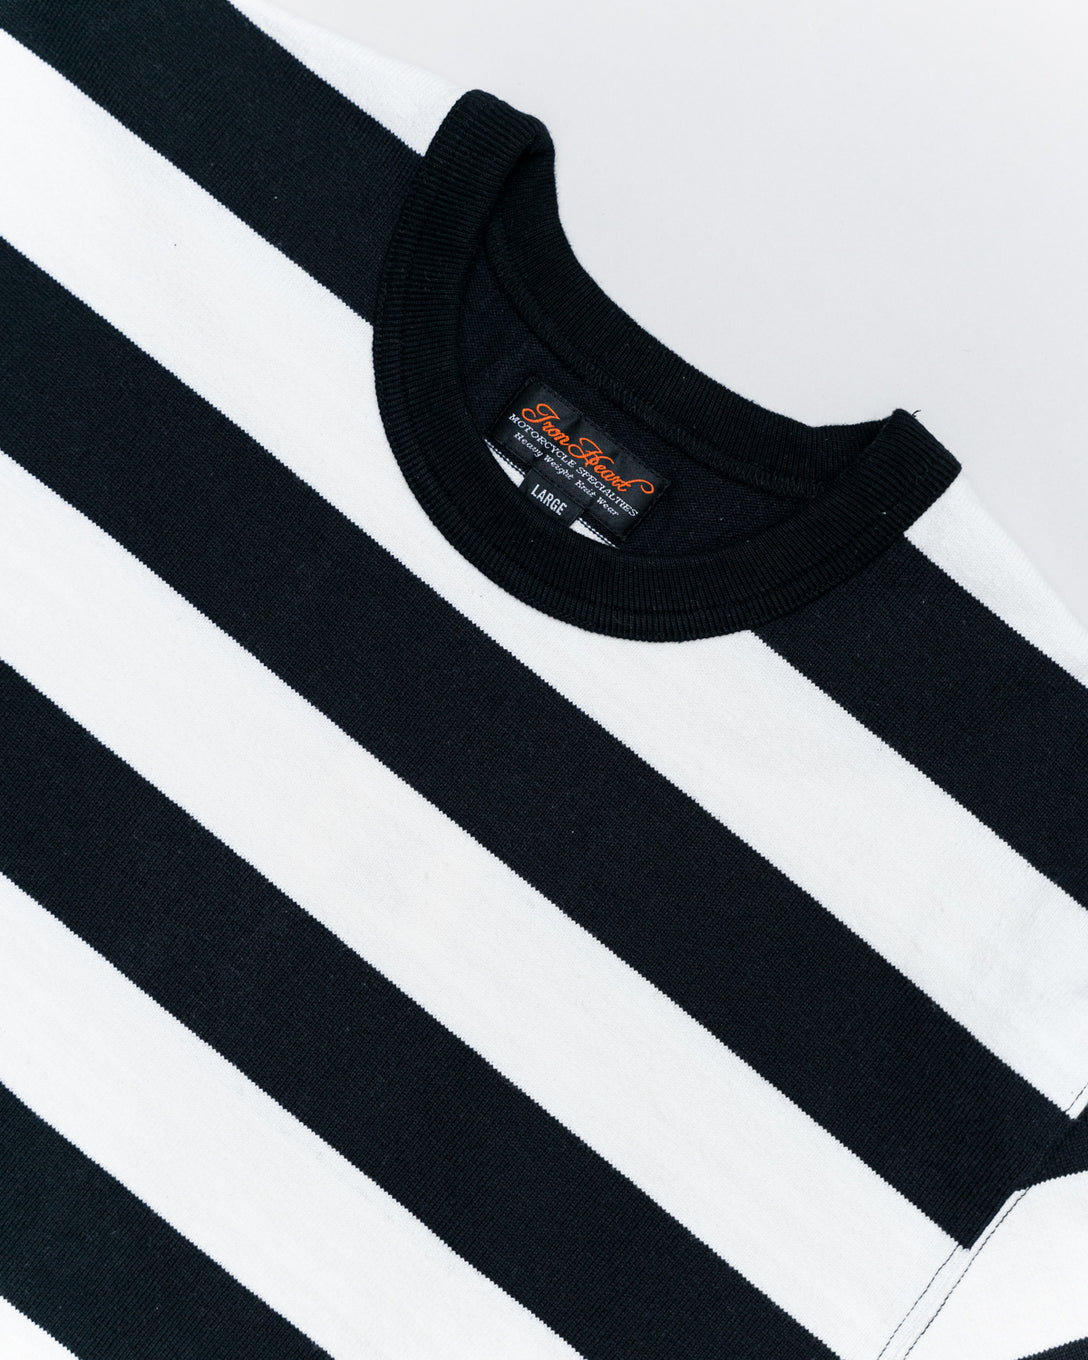 Non Stock Motorcycle Heavyweight Black and White Wide Striped T-Shirt | Bronson Black/White / S